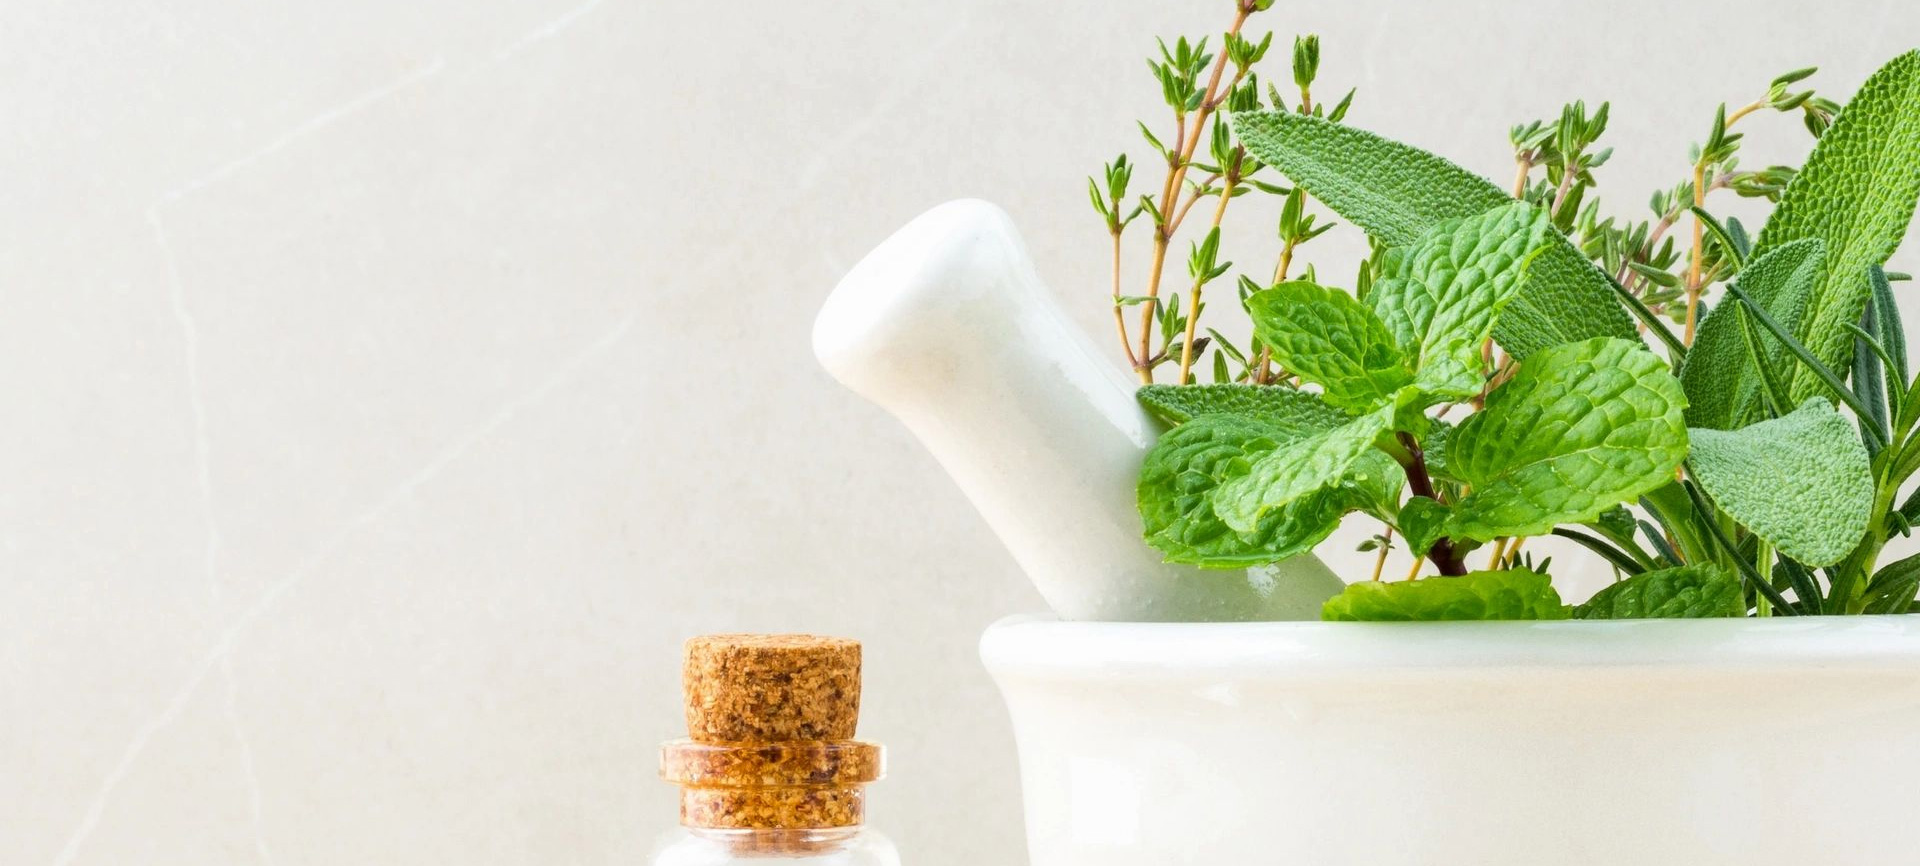 A bottle of essential oil next to a mortar and pestle.